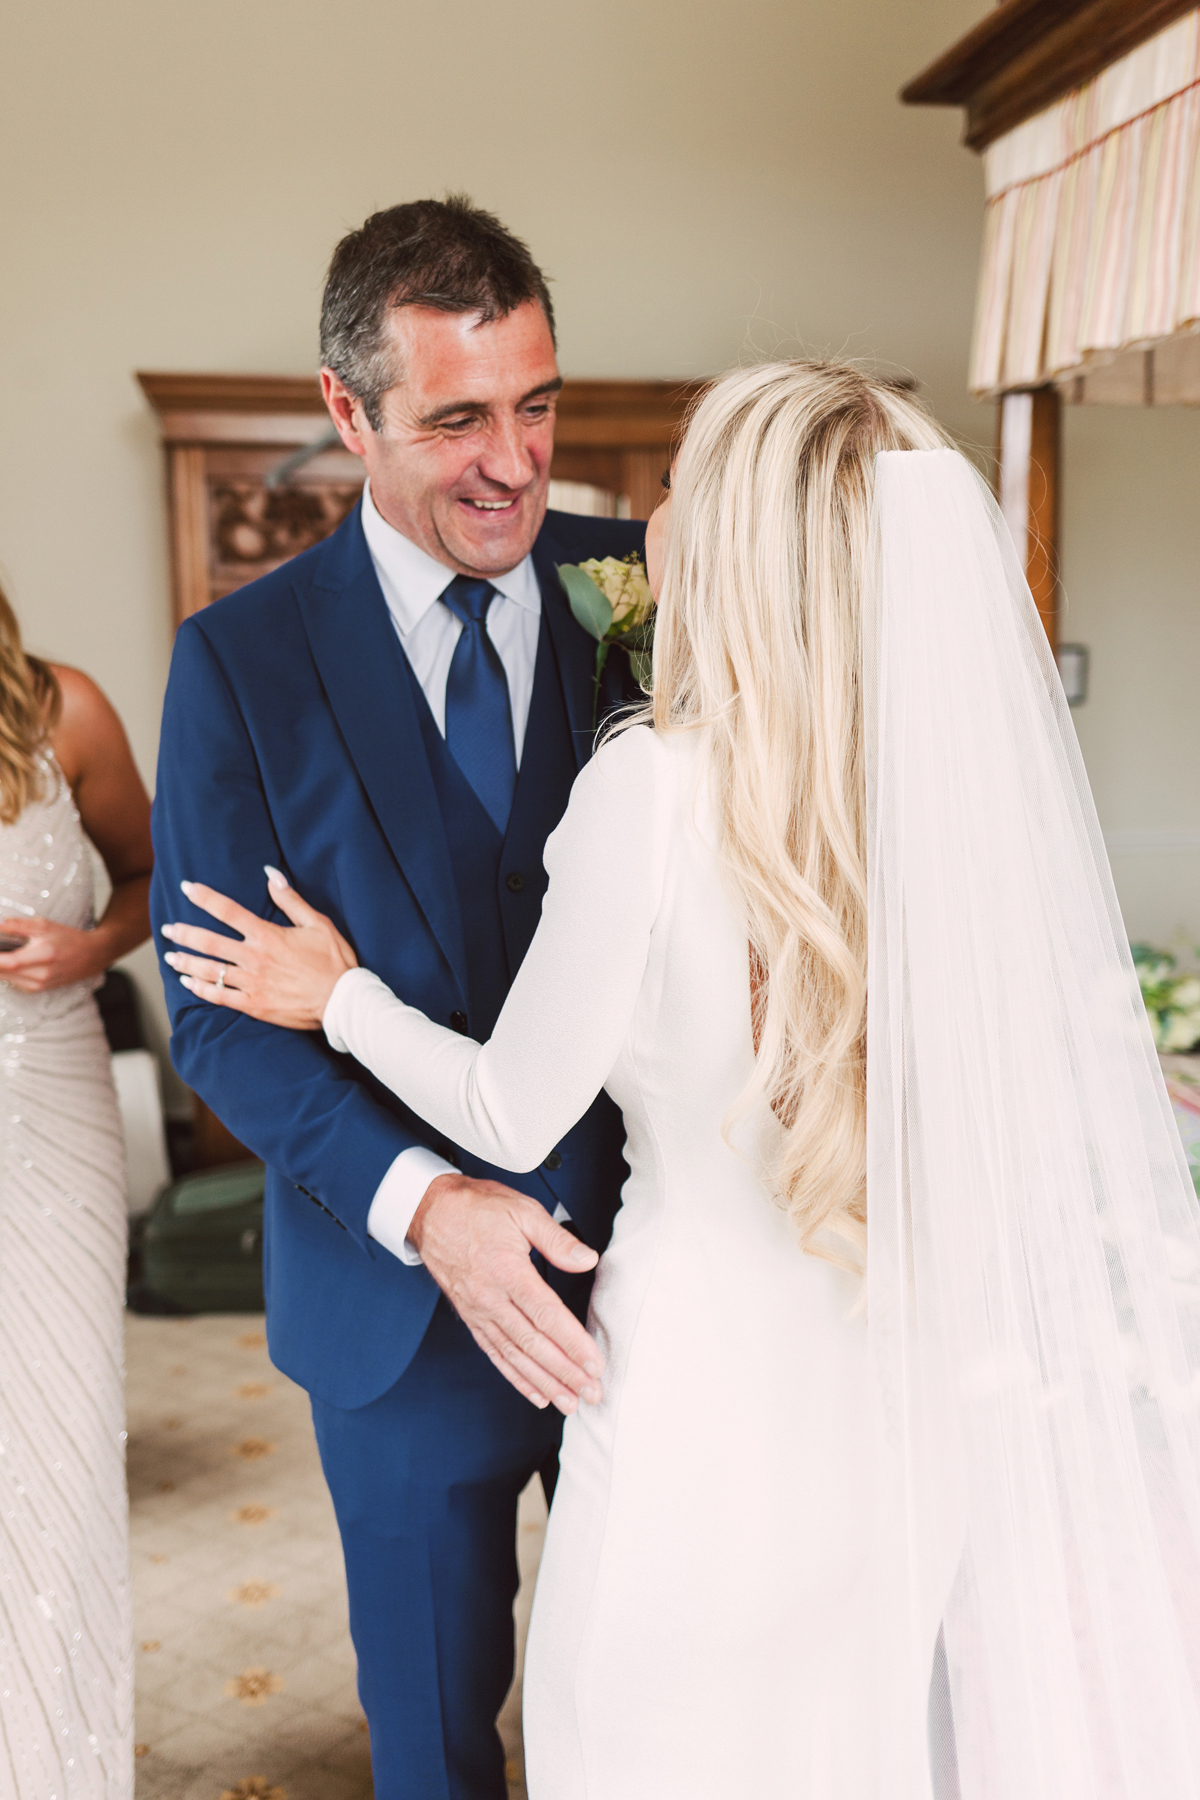 30 A Pronovias gown and Cheshire country house wedding